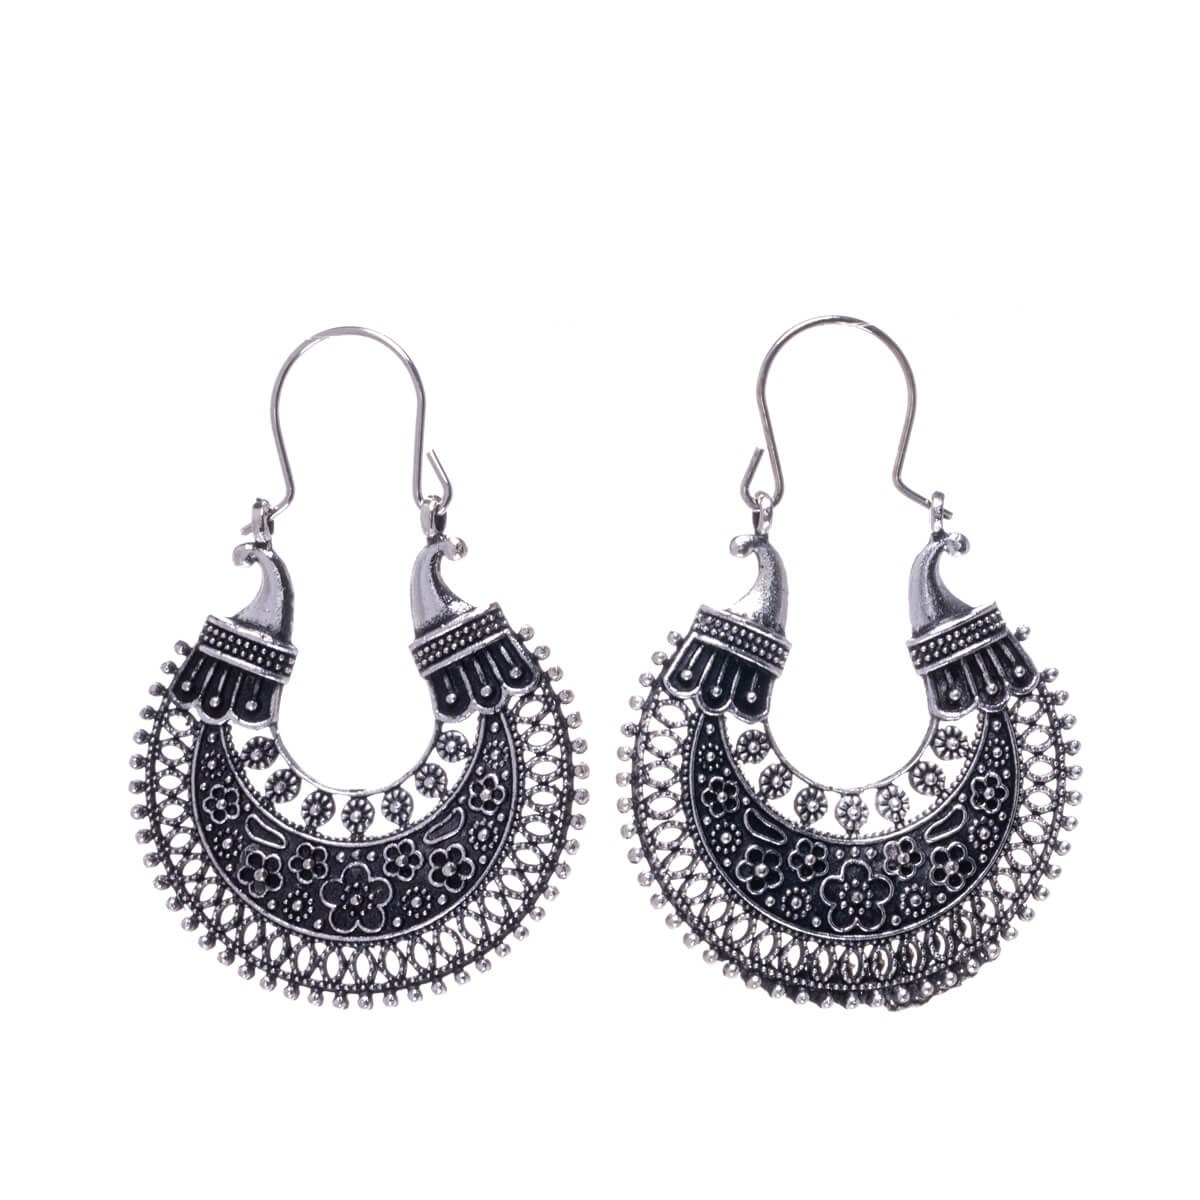 Hanging textured ring earrings